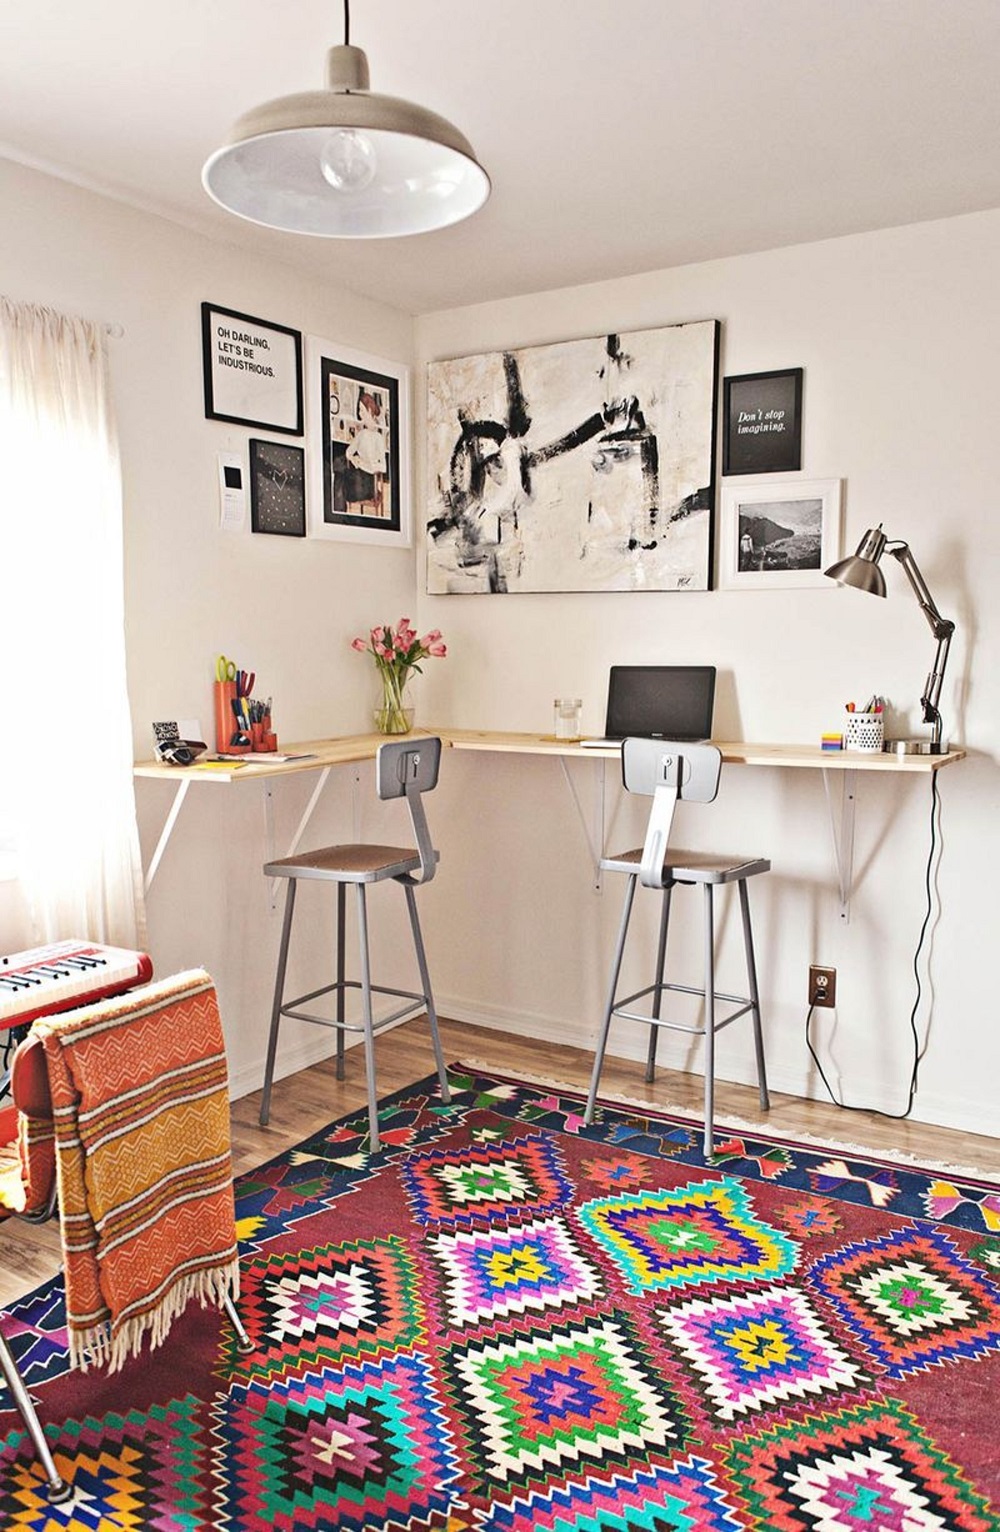 dk11 You can build your own desk with these DIY desk ideas